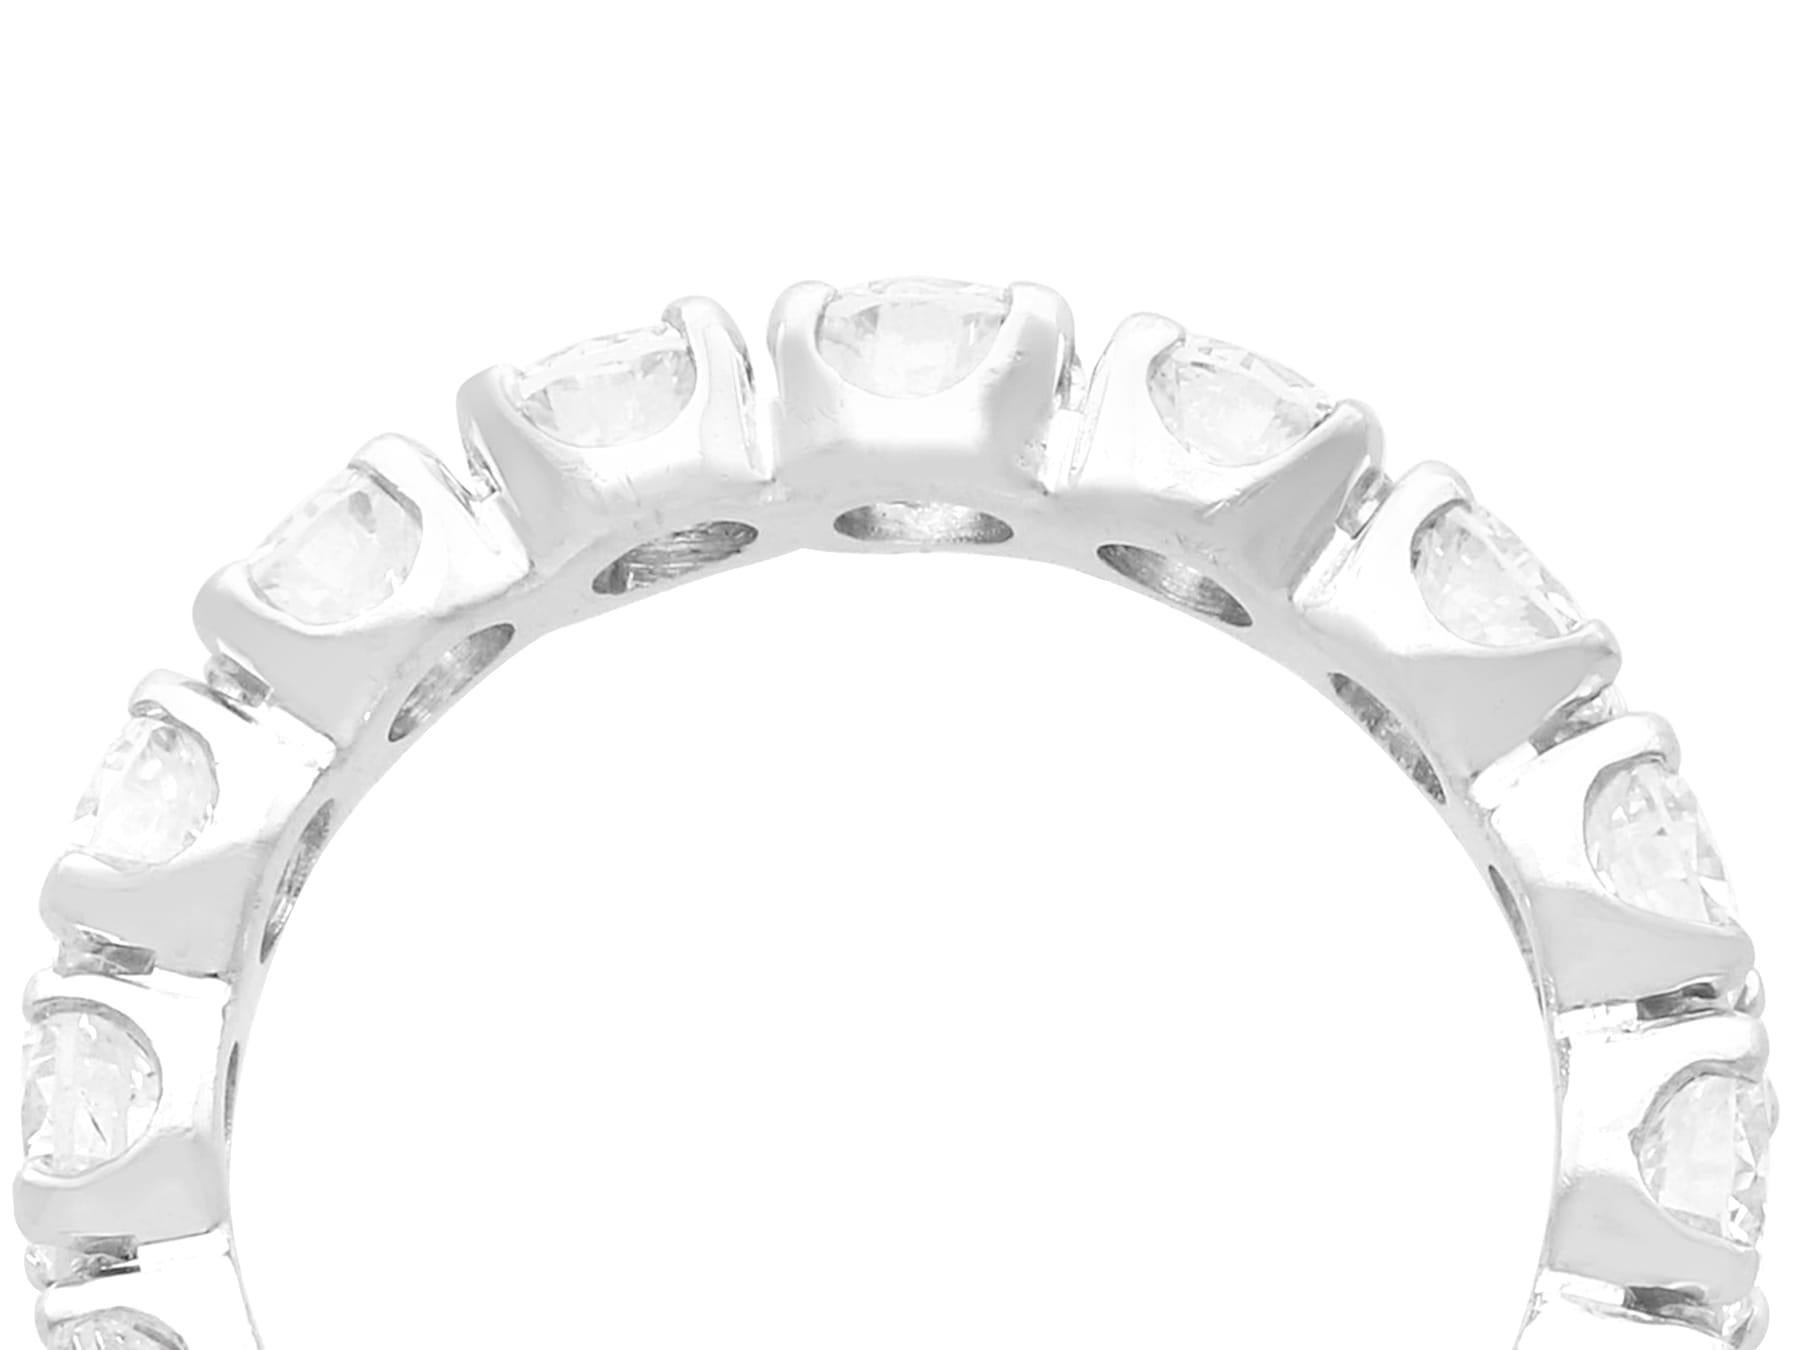 A stunning, fine and impressive vintage 1980s 2.88 carat diamond and 18 karat white gold full eternity ring; part of our diverse diamond jewelry and estate jewelry collections.

This stunning, fine and impressive vintage full eternity ring has been